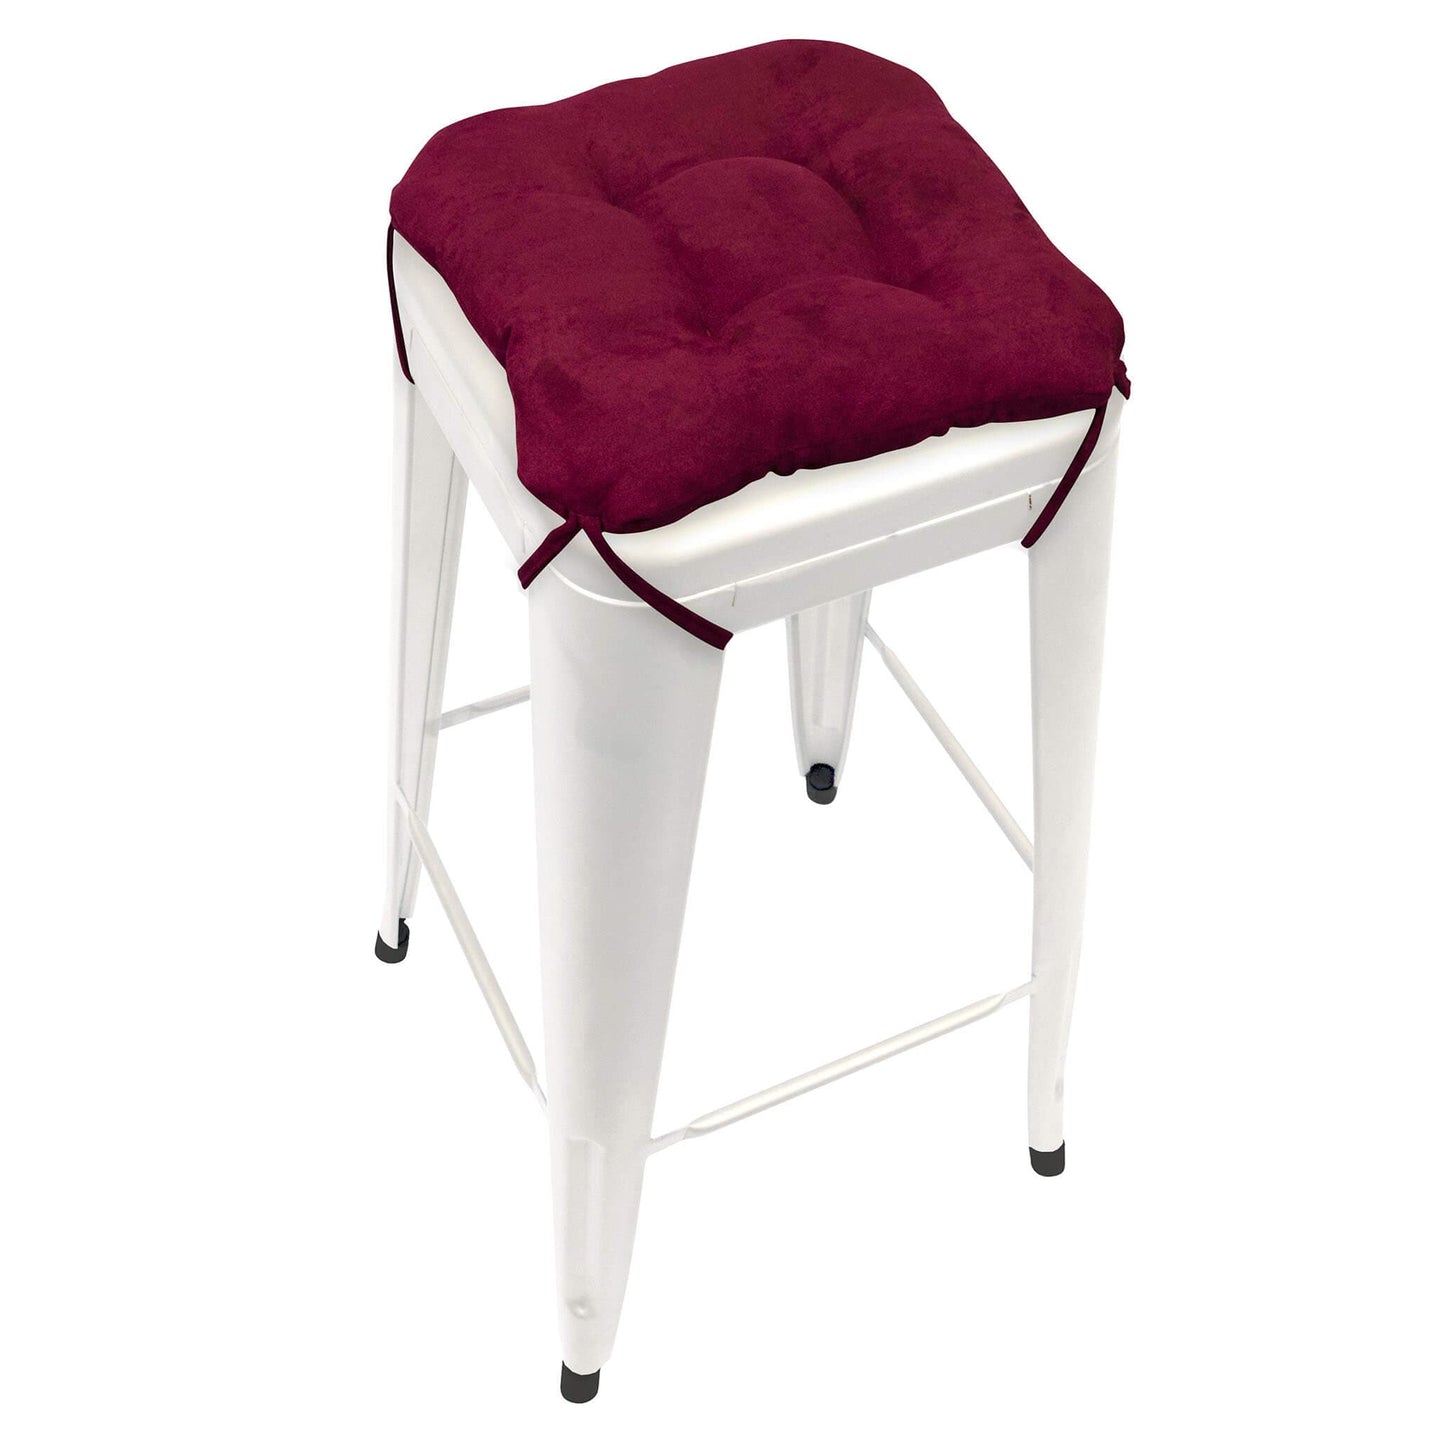 Micro-suede Claret Red Square Industrial Bar Stool Cushion - Latex Foam Fill - Barnett Home Decor - Wine Red